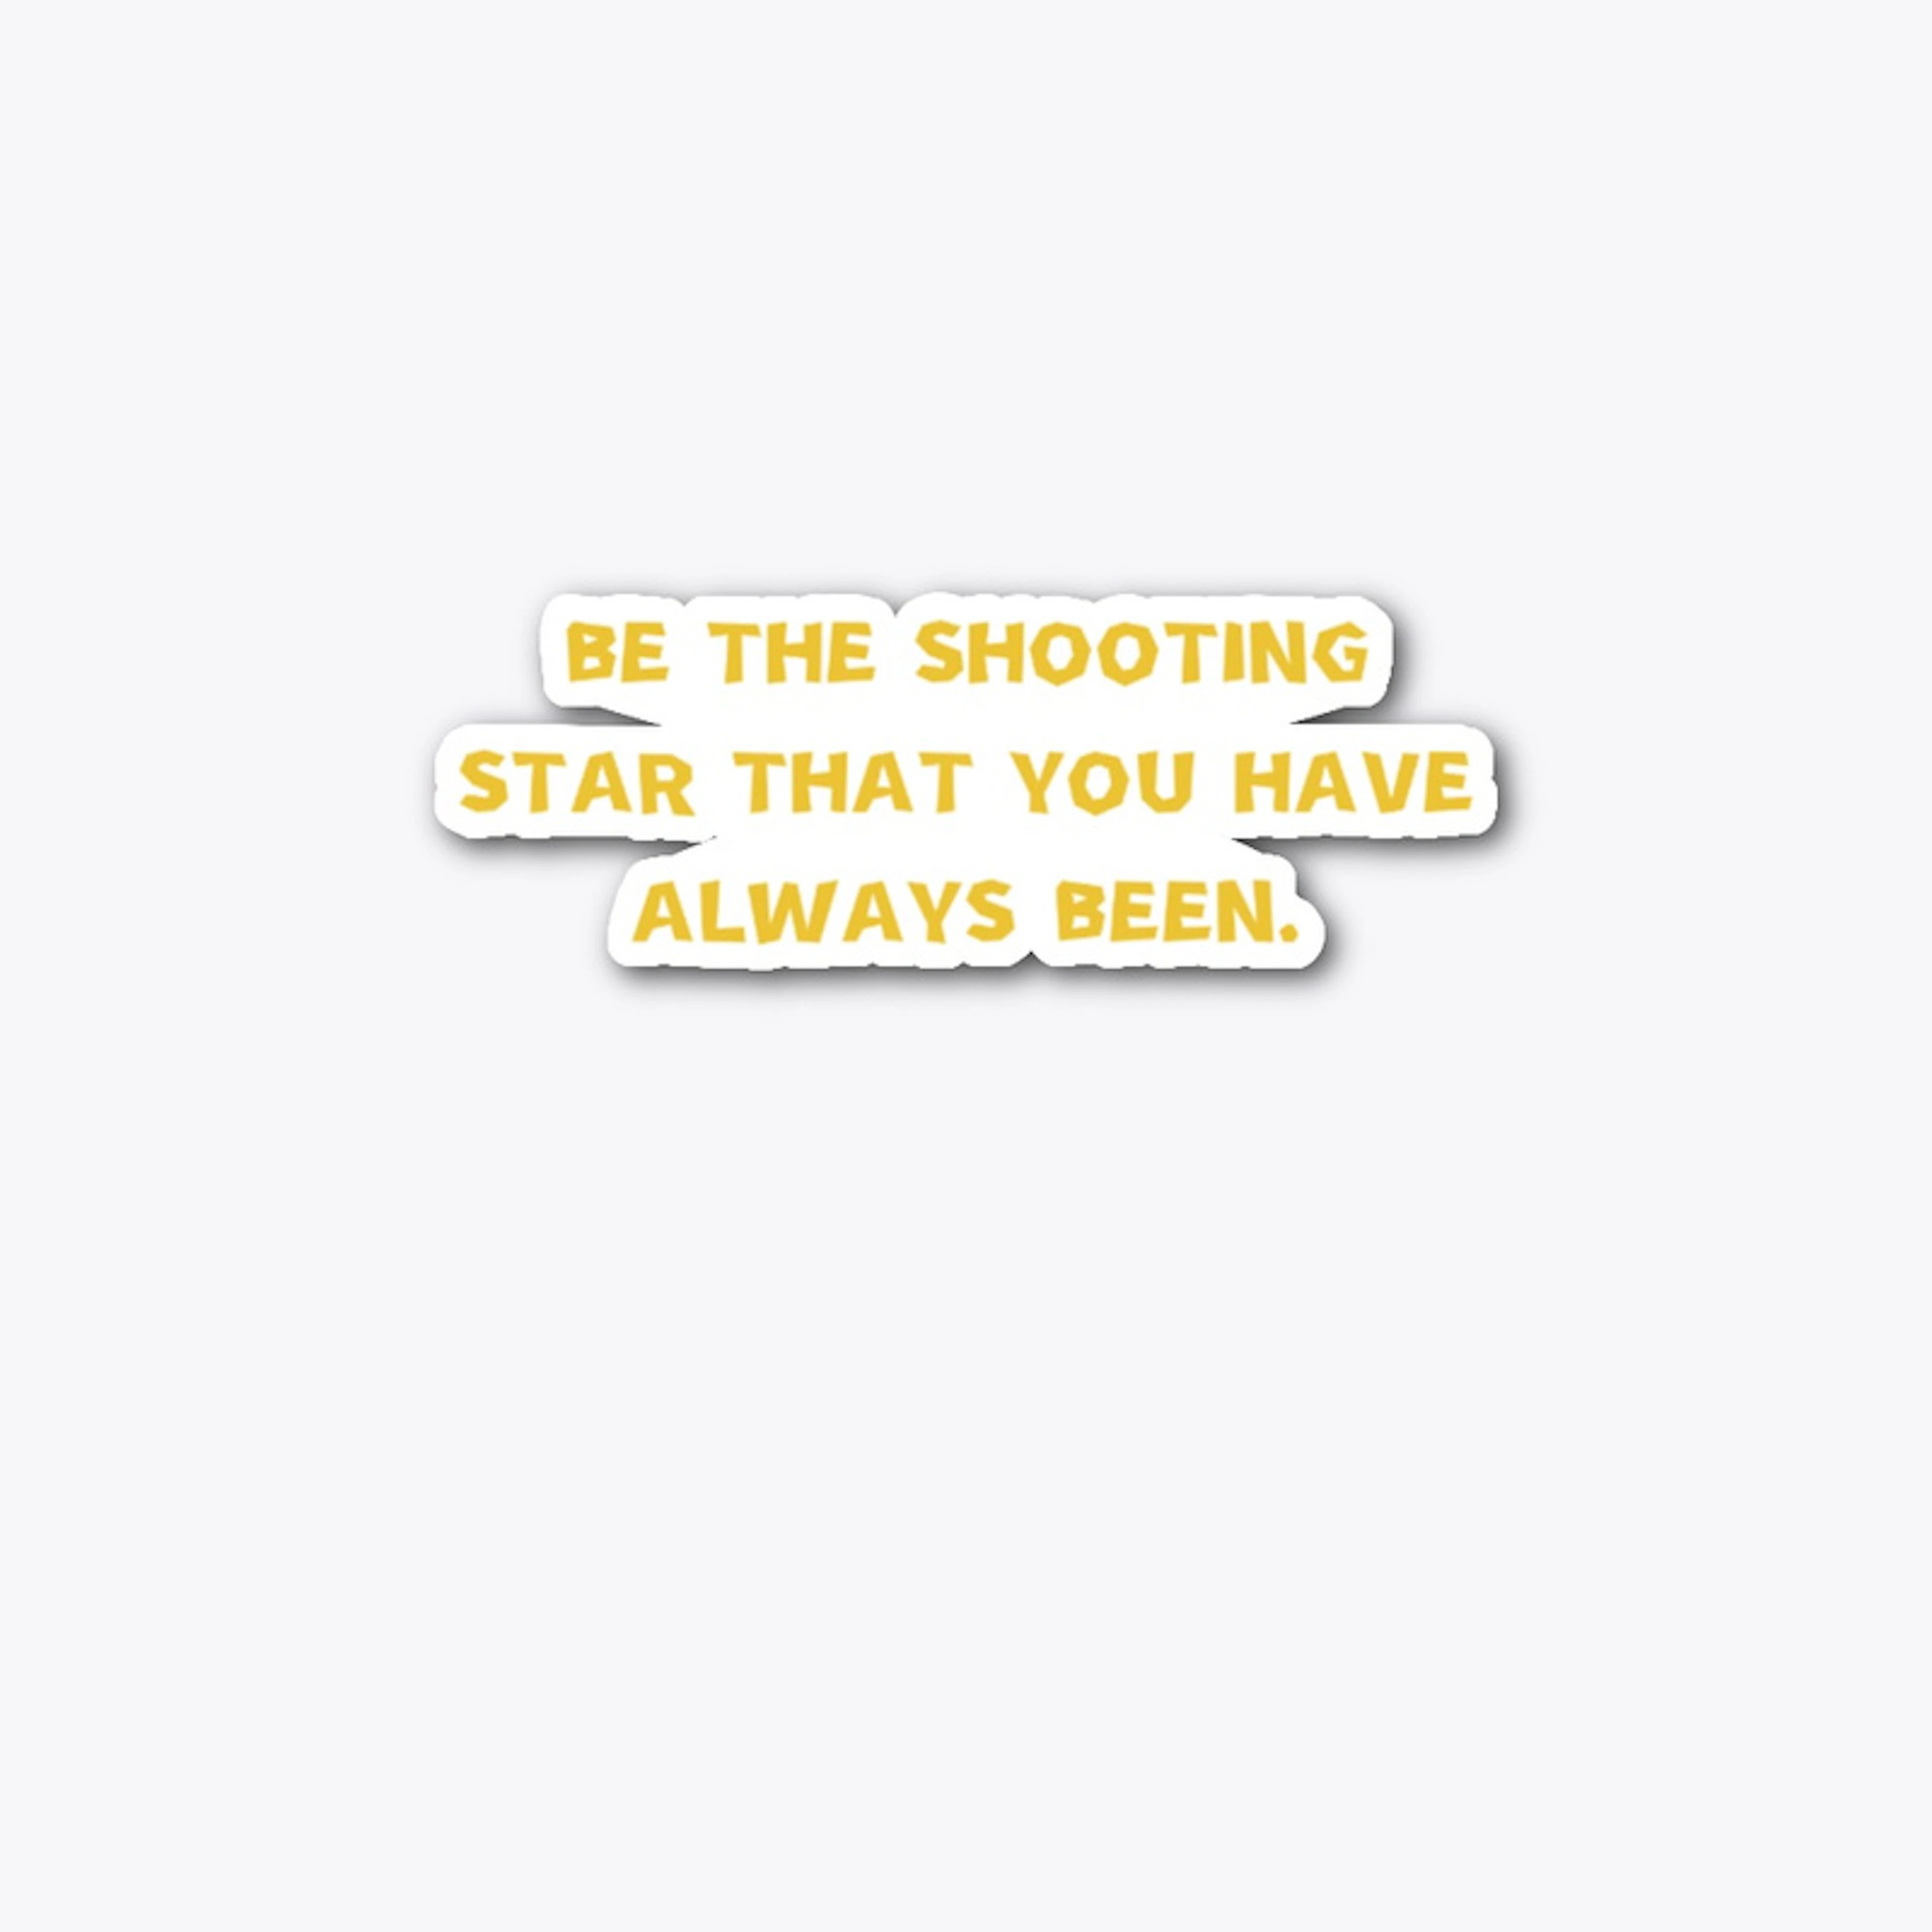 Be the shooting star you've always been